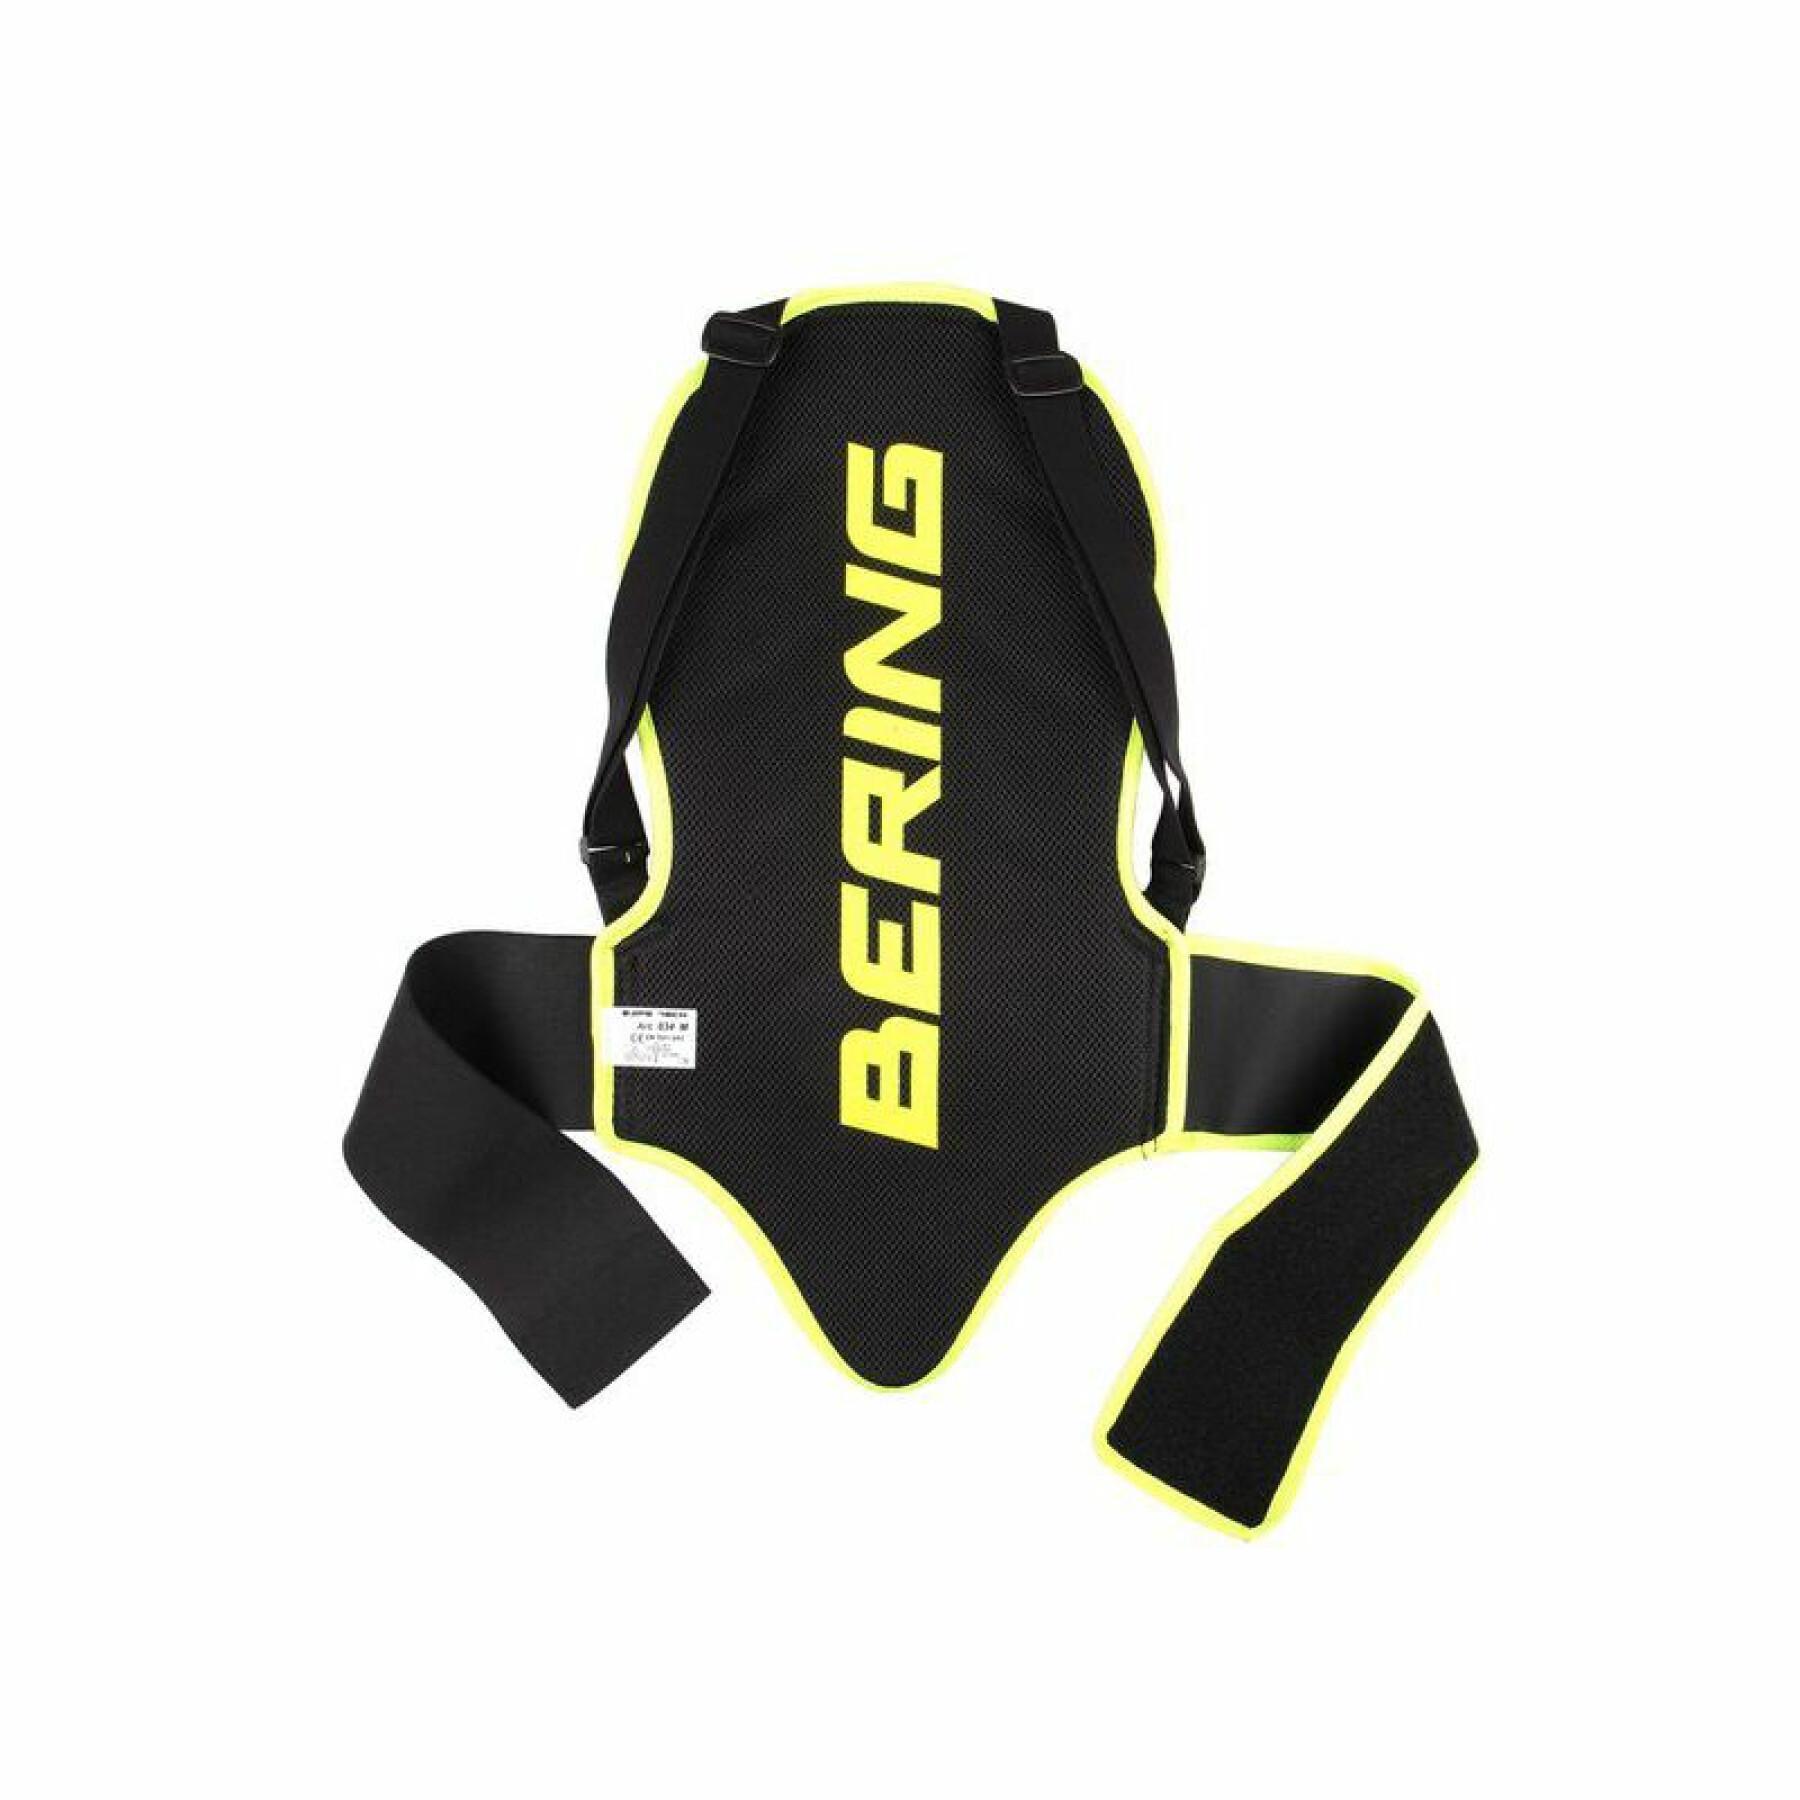 Back protector for motorcycles Bering safe tech